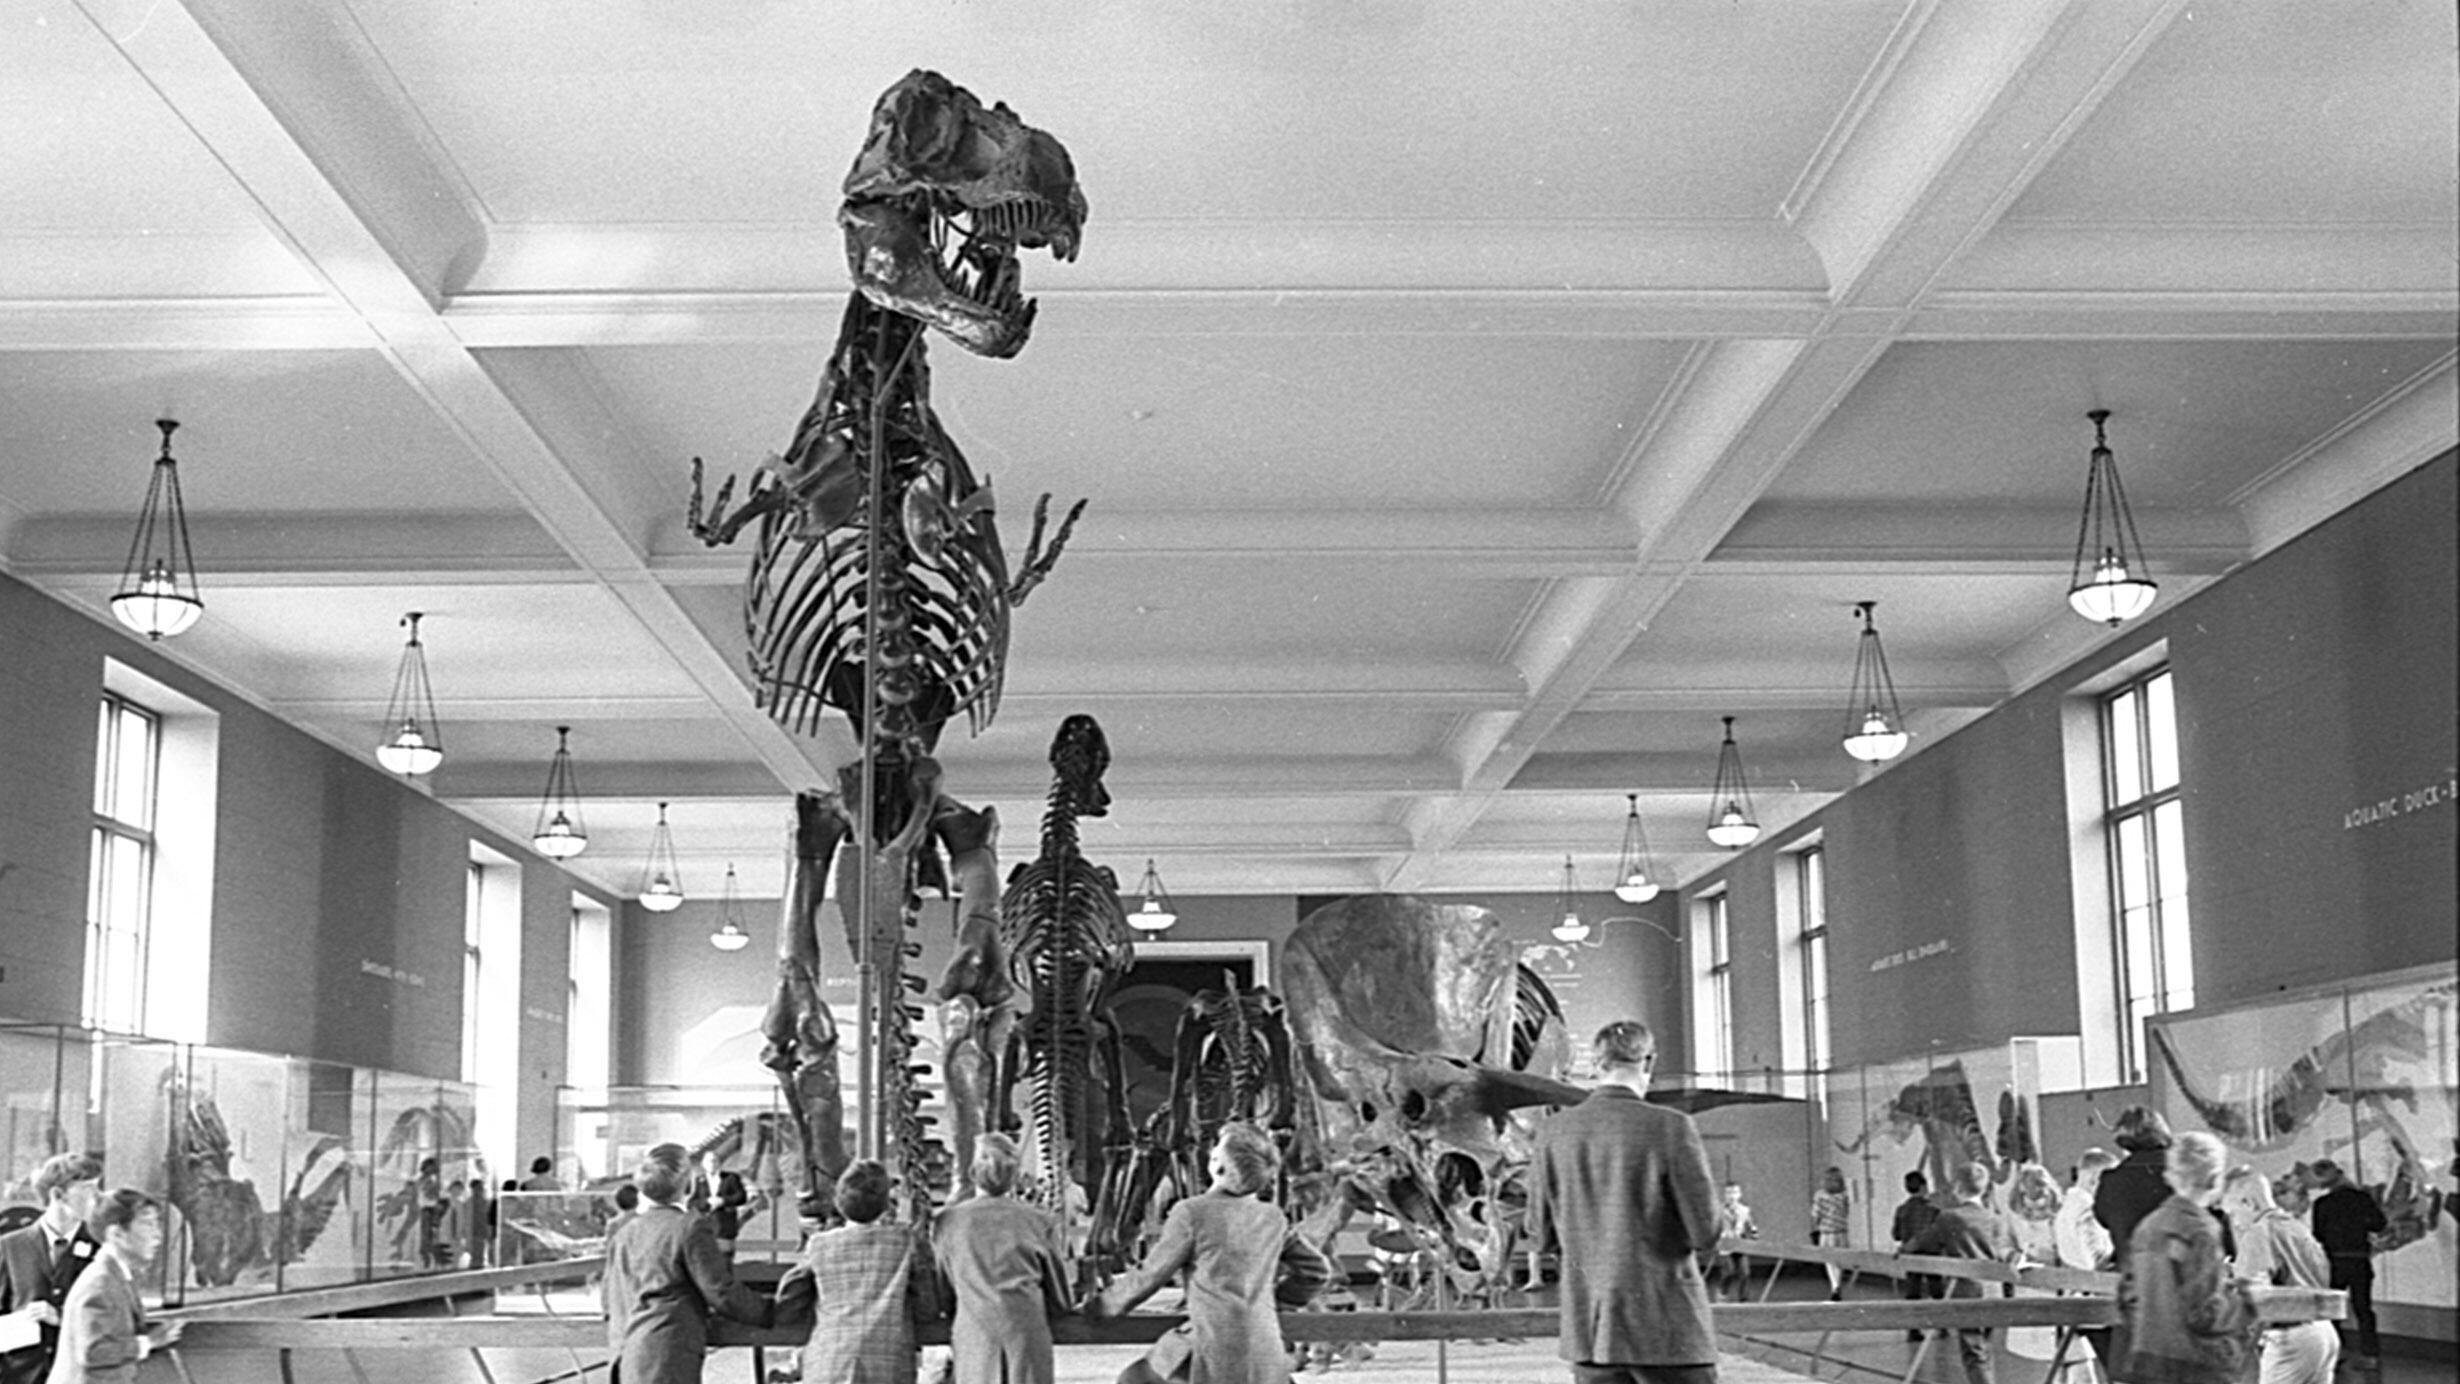 In this archival image, Museum visitors gather around the T. rex mount, seen in its formerly upright stance with three claws.